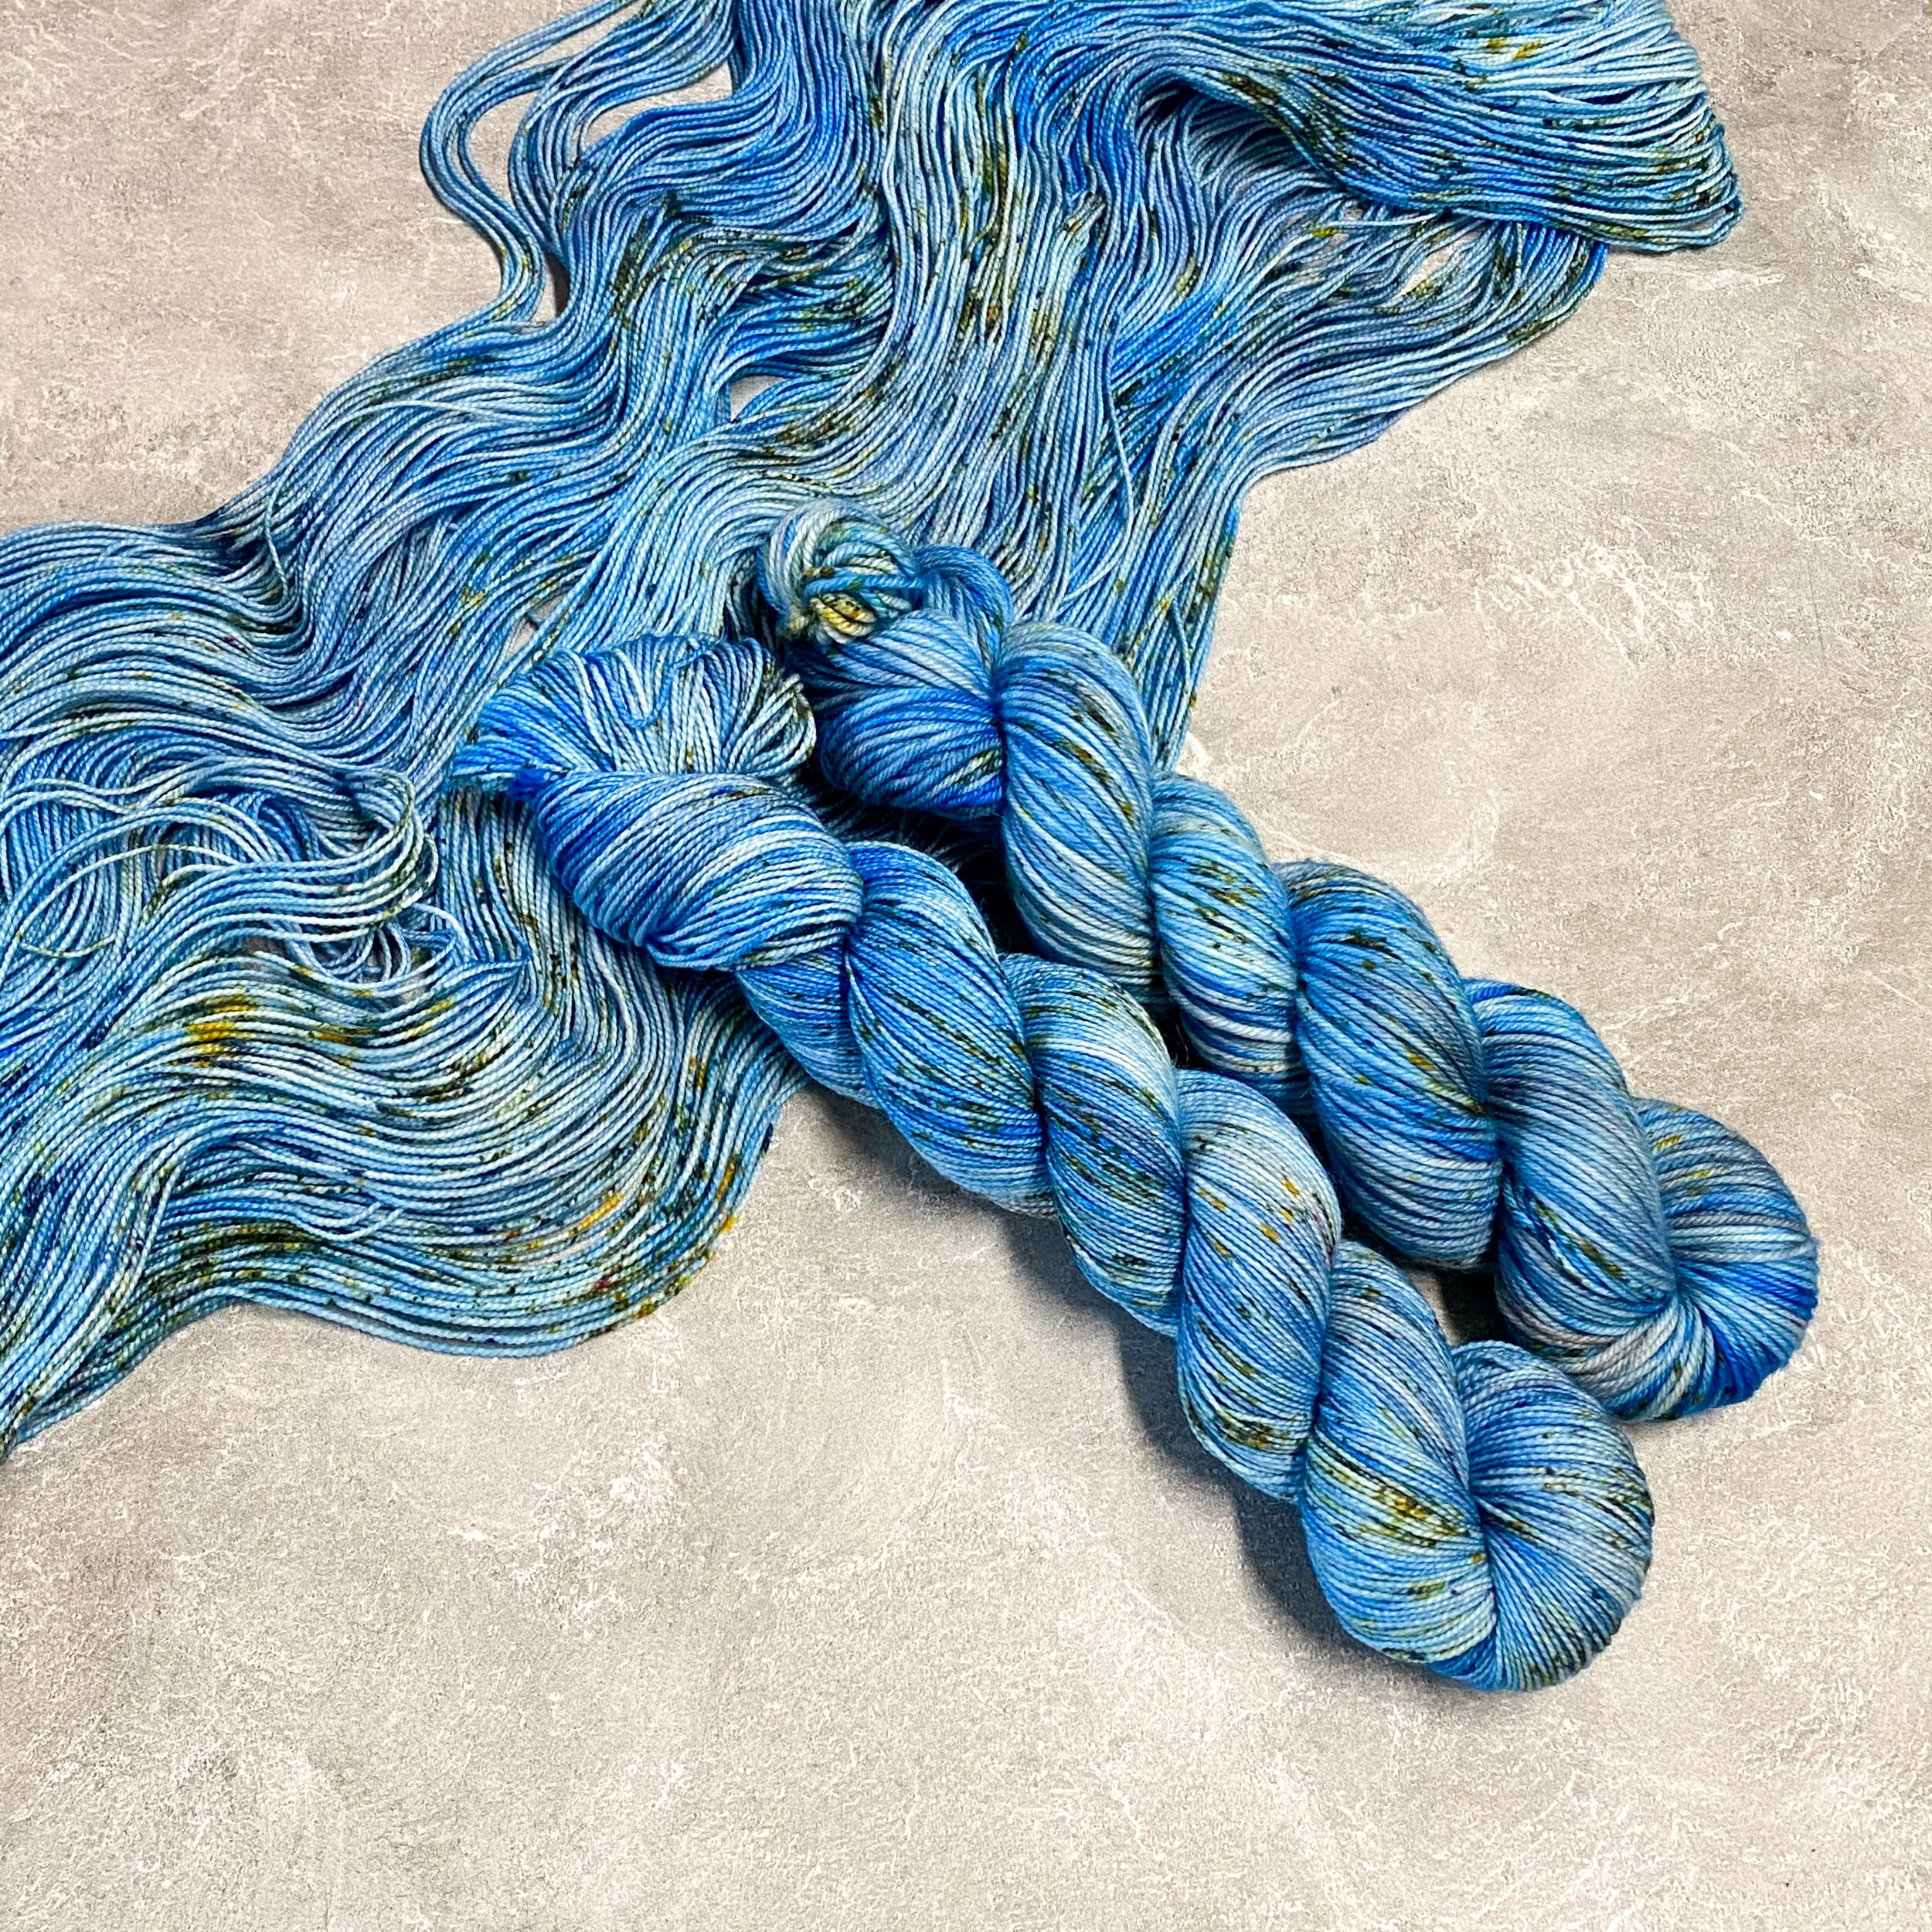 Two skeins of light blue yarn with gray and yellow speckles sitting on top of spread out yarn in the same color, dyed by Totally Rad Yarn.